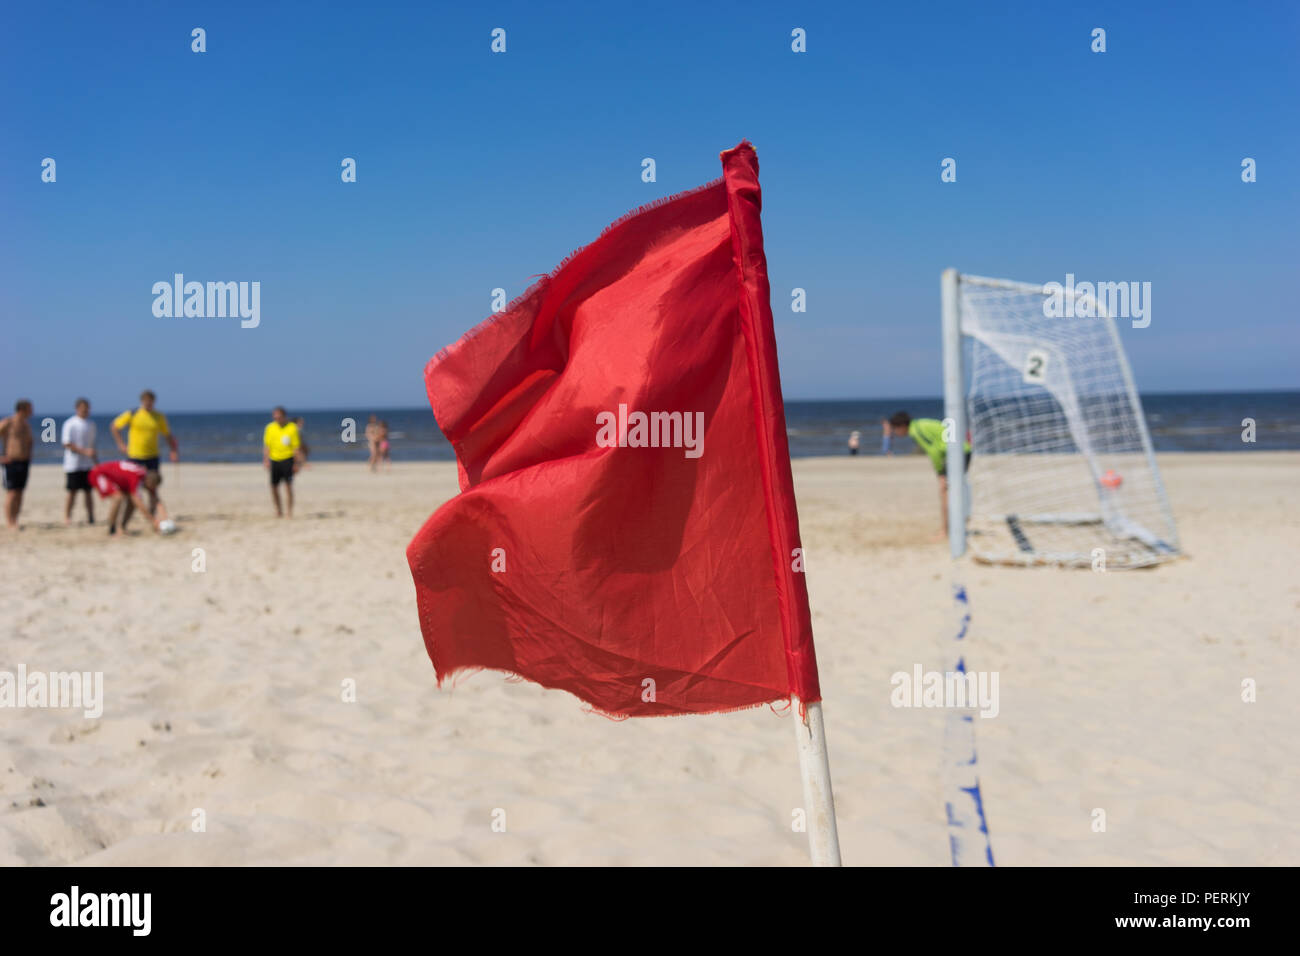 People Play Football On The Beach On A Background Of Red Flag